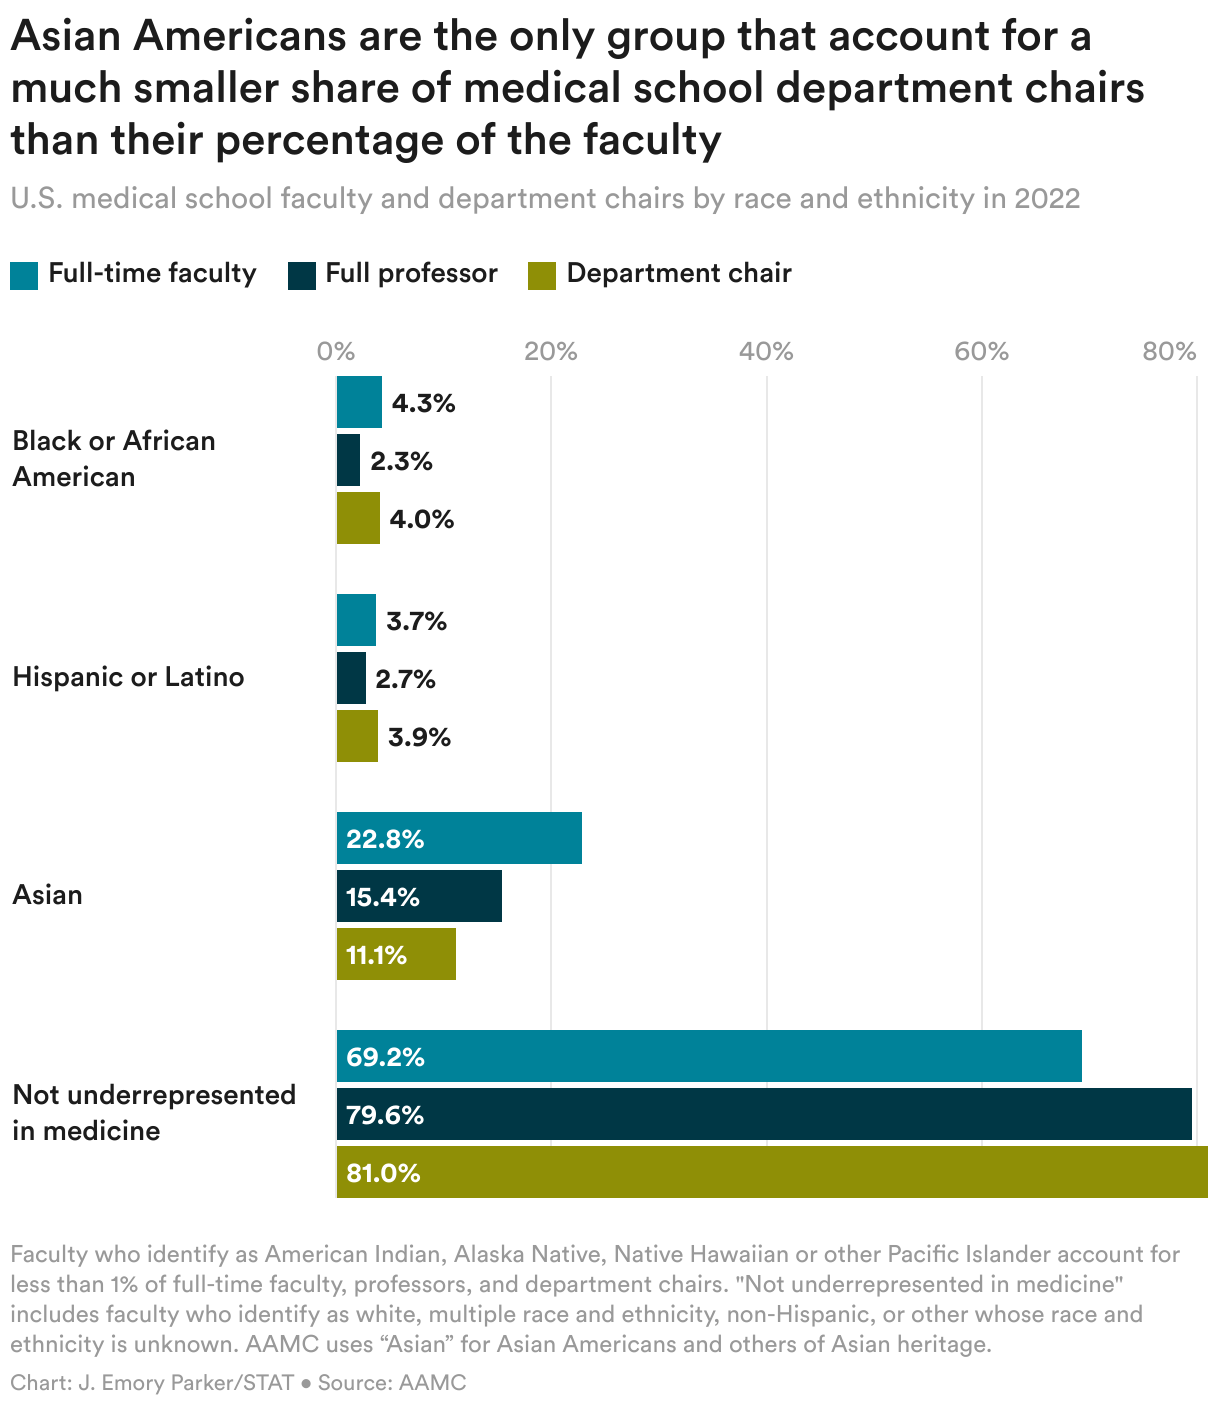 Asians make up 22.8% of full-time faculty but only 11.1% of department chairs.